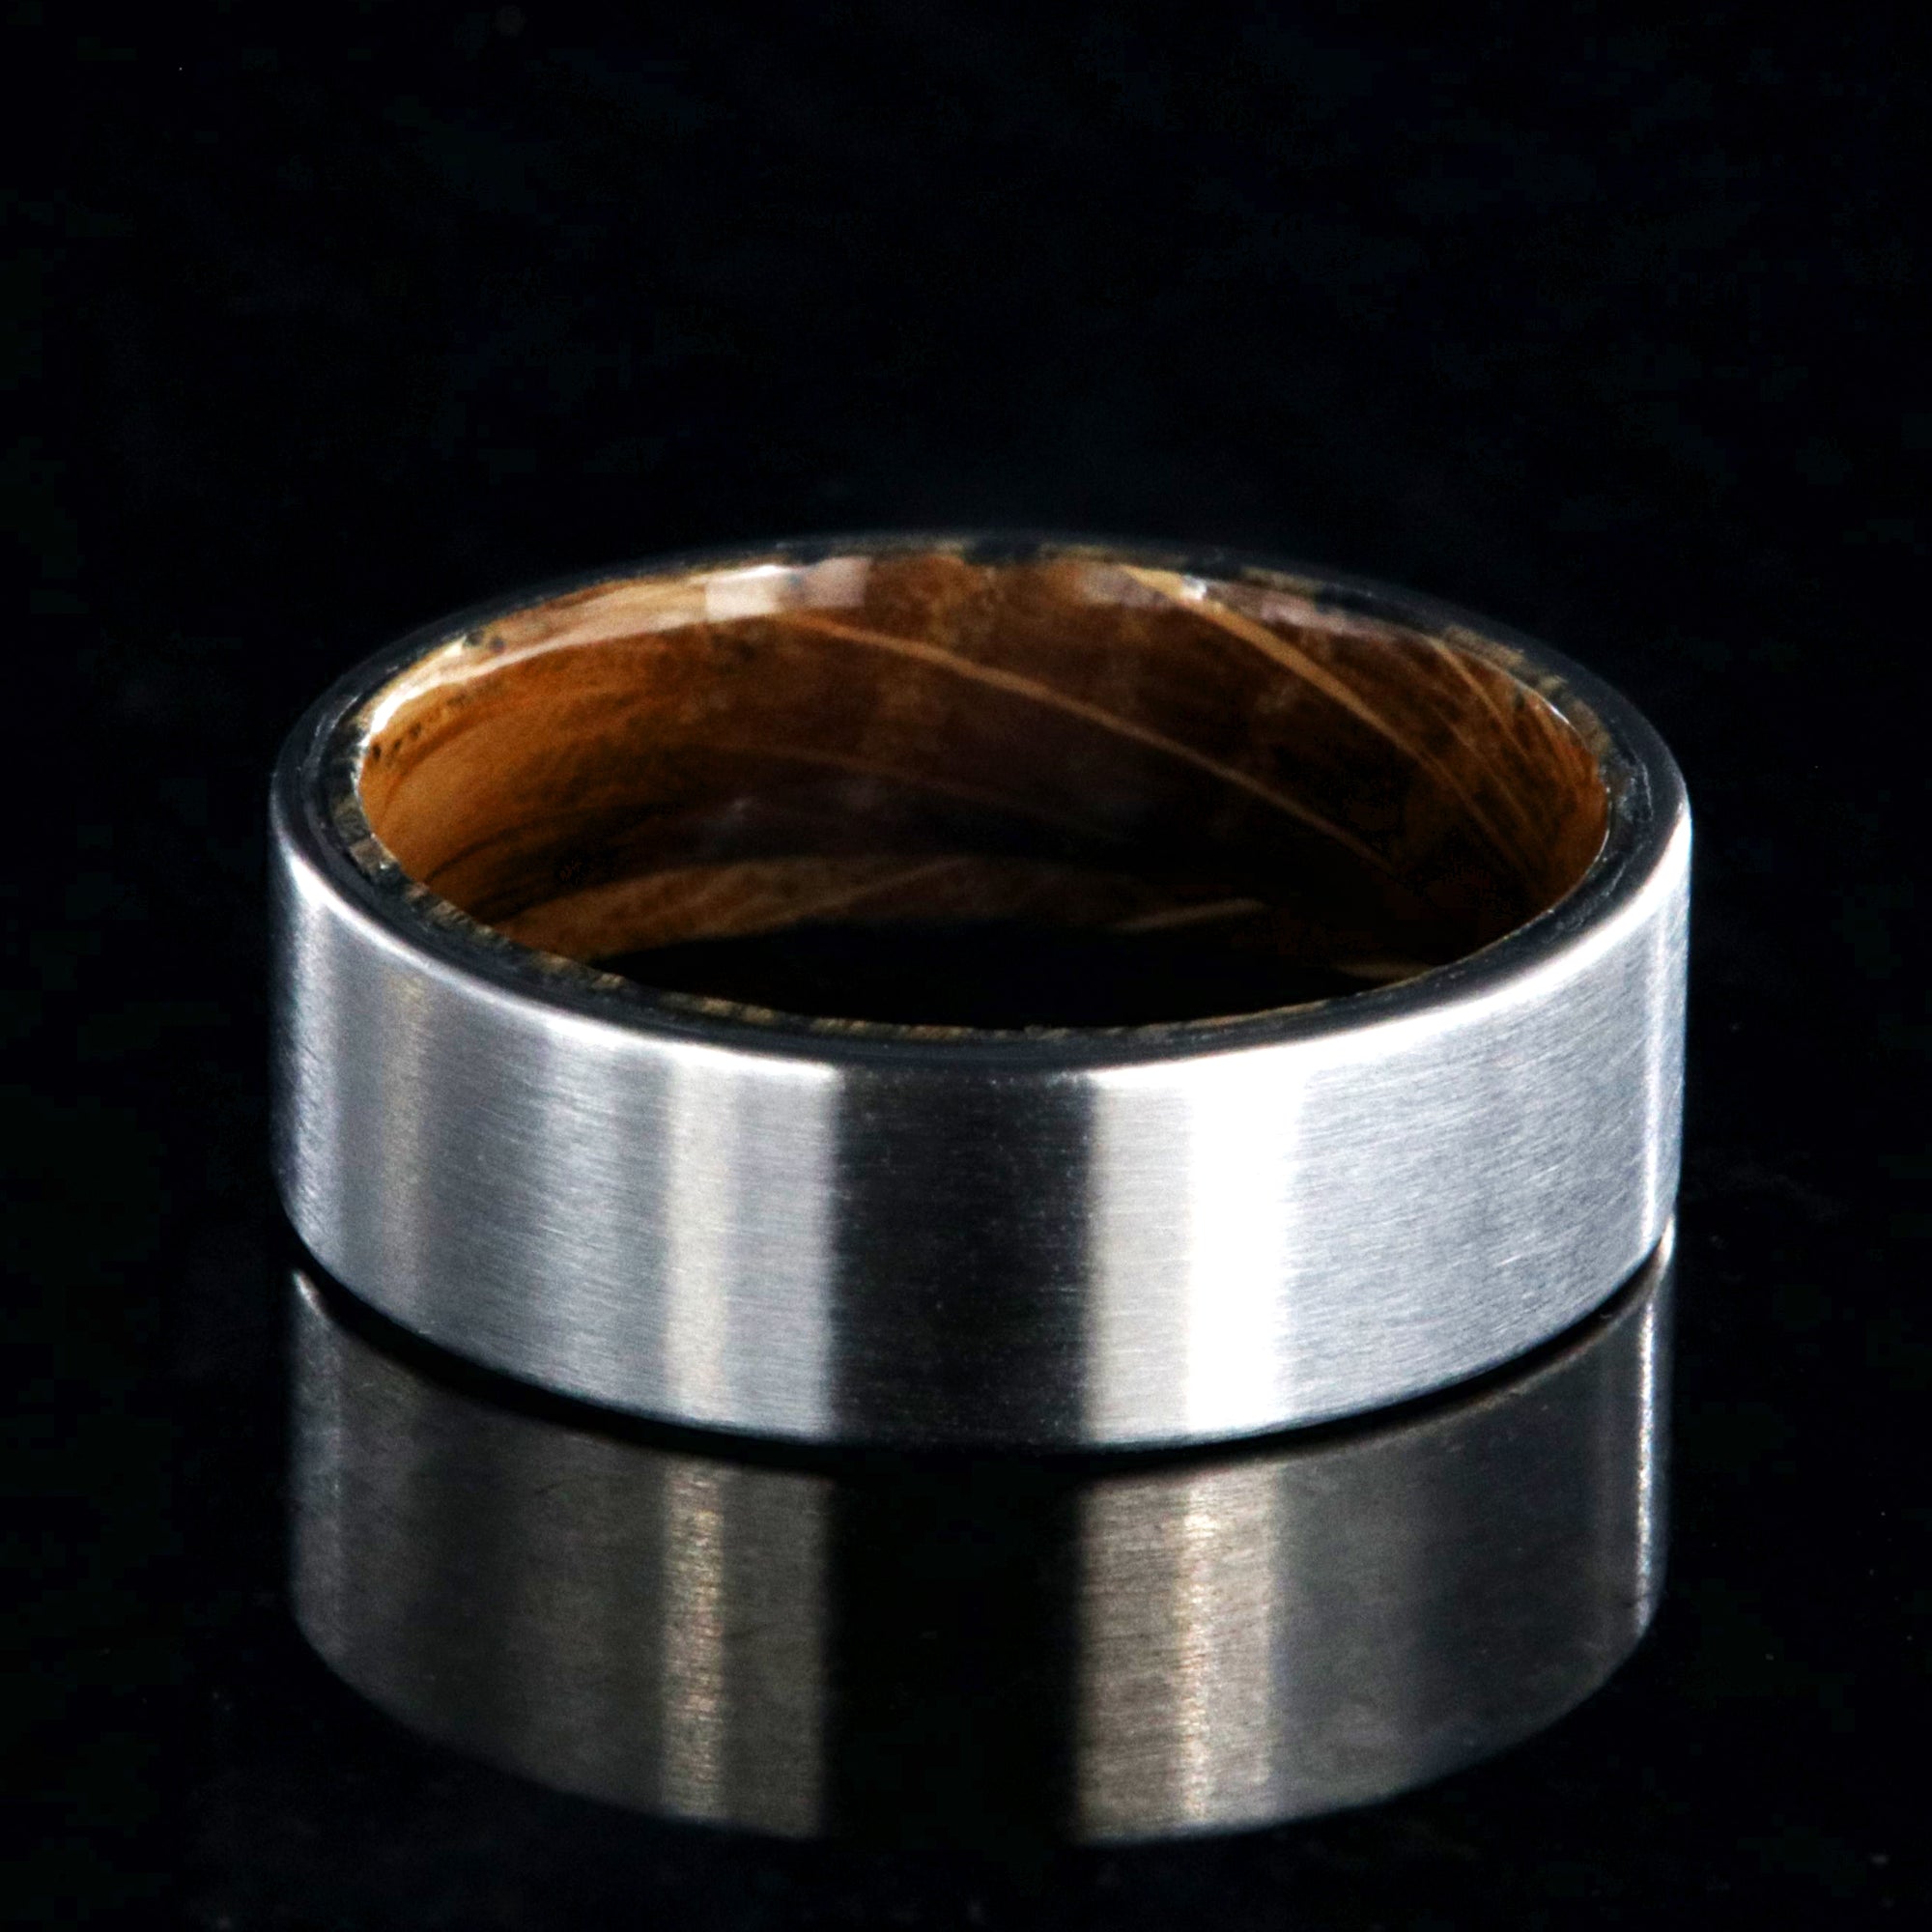 7mm wide titanium wedding band with a whiskey barrel sleeve and flat profile